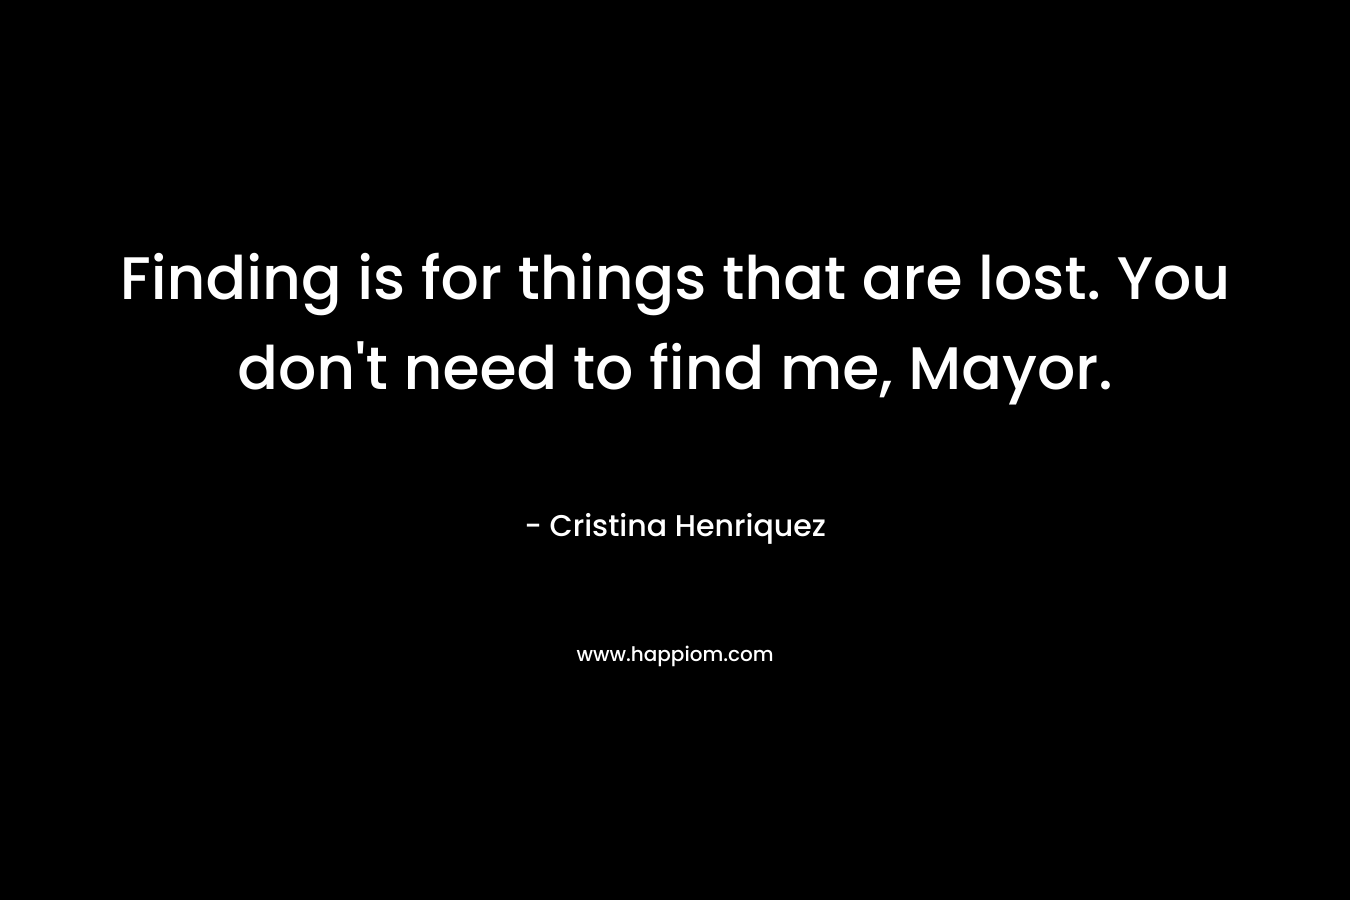 Finding is for things that are lost. You don’t need to find me, Mayor. – Cristina Henriquez